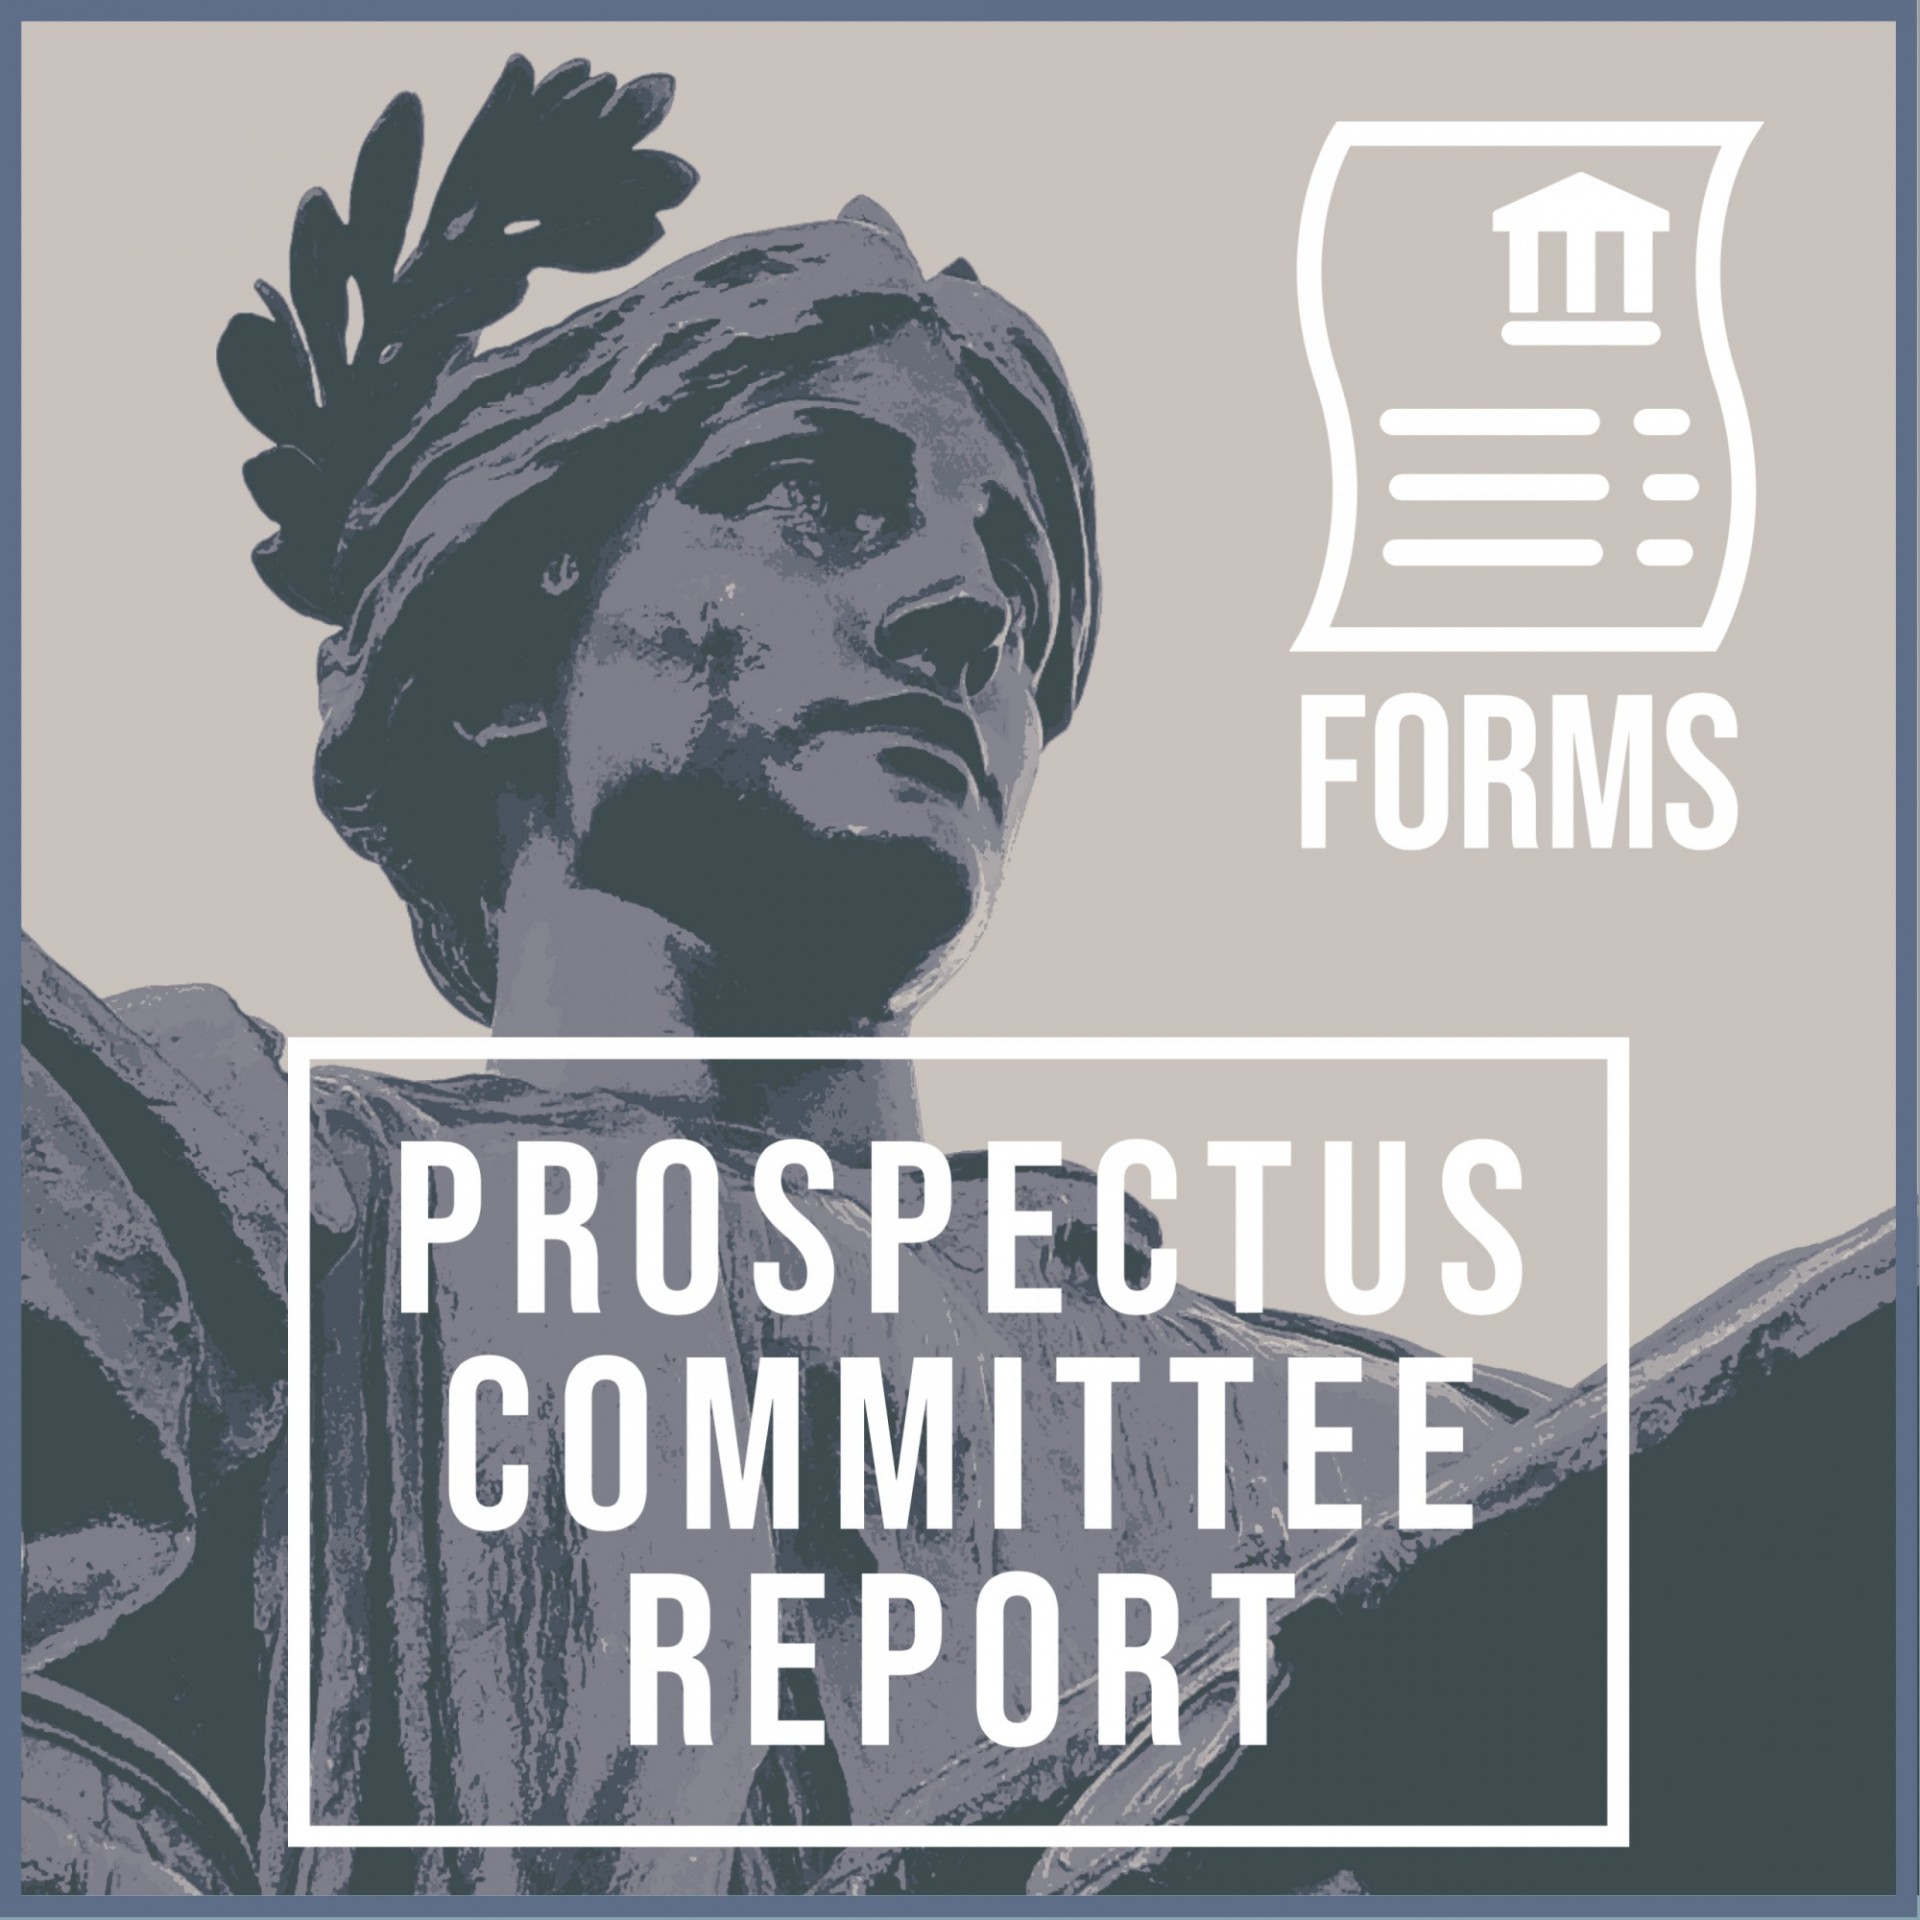 Forms Icon: Prospectus Committee Report